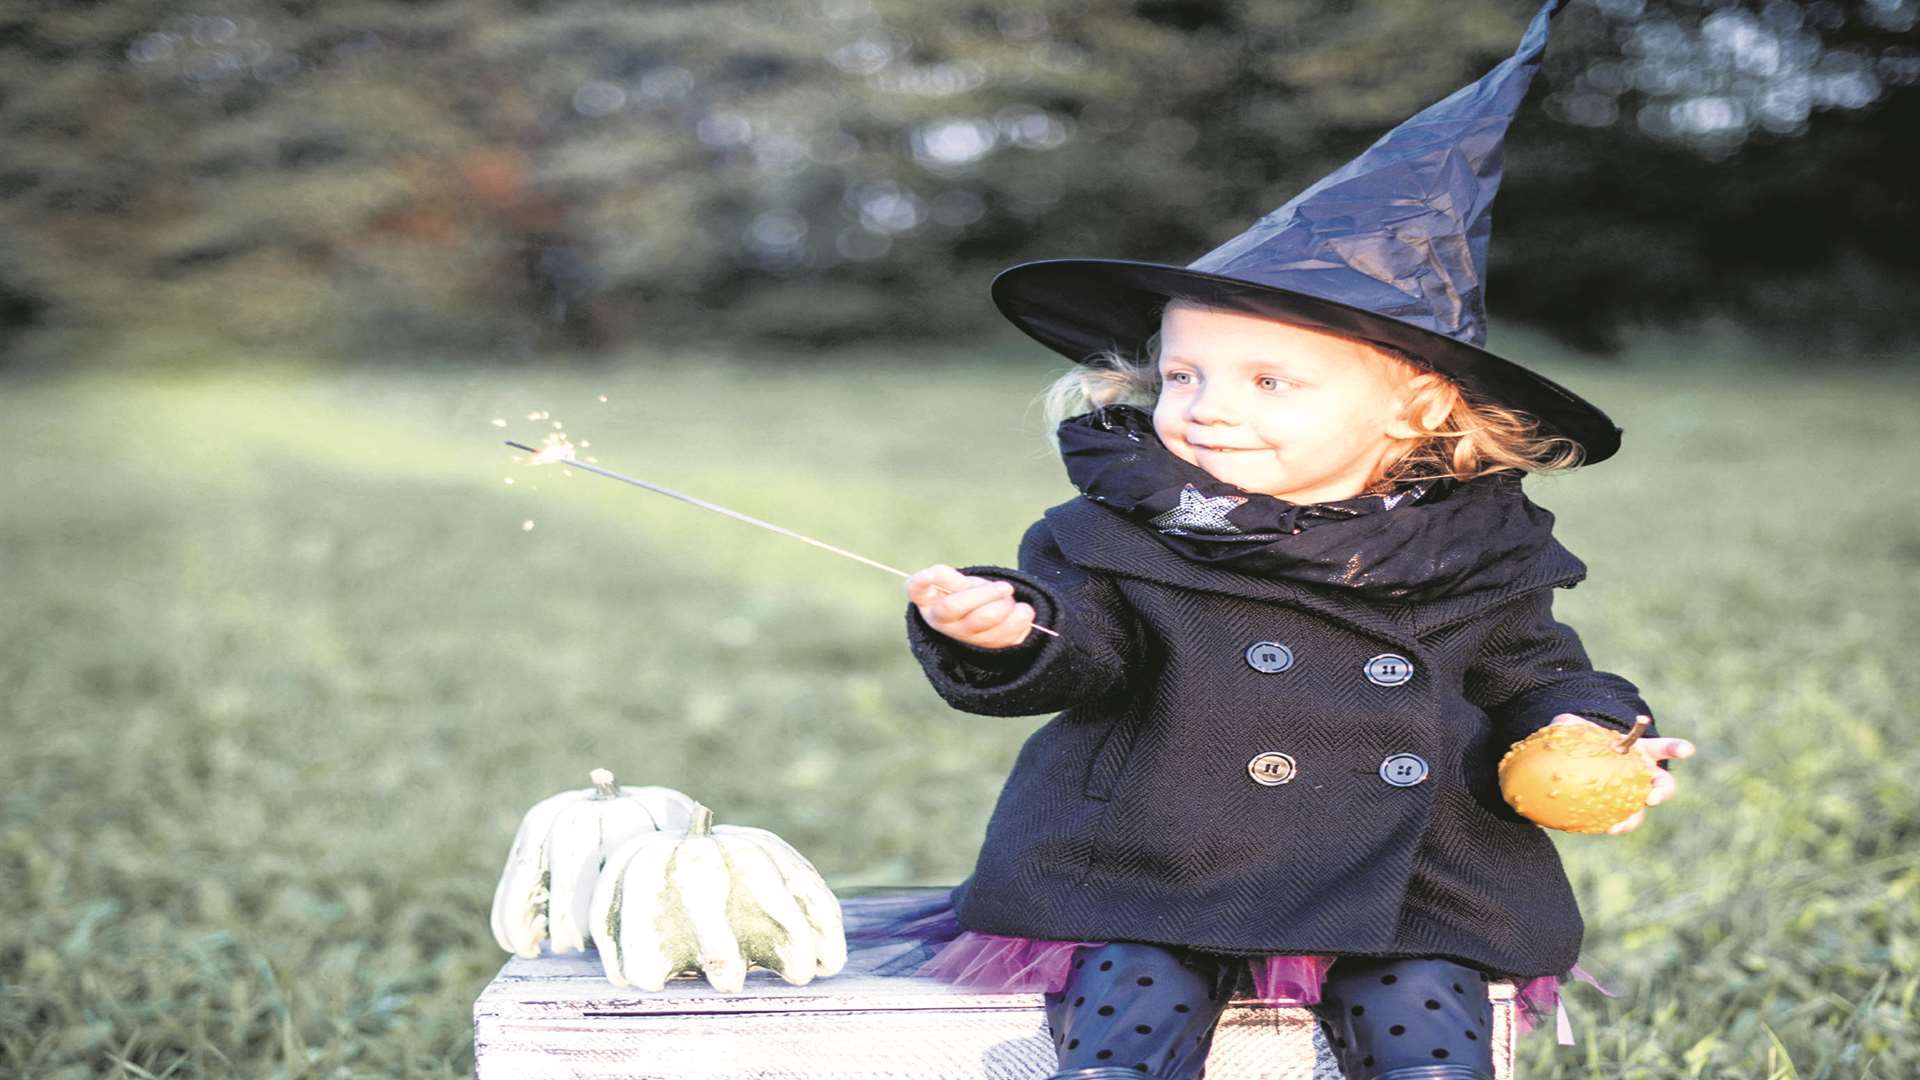 There's so much happening at October half term across Kent